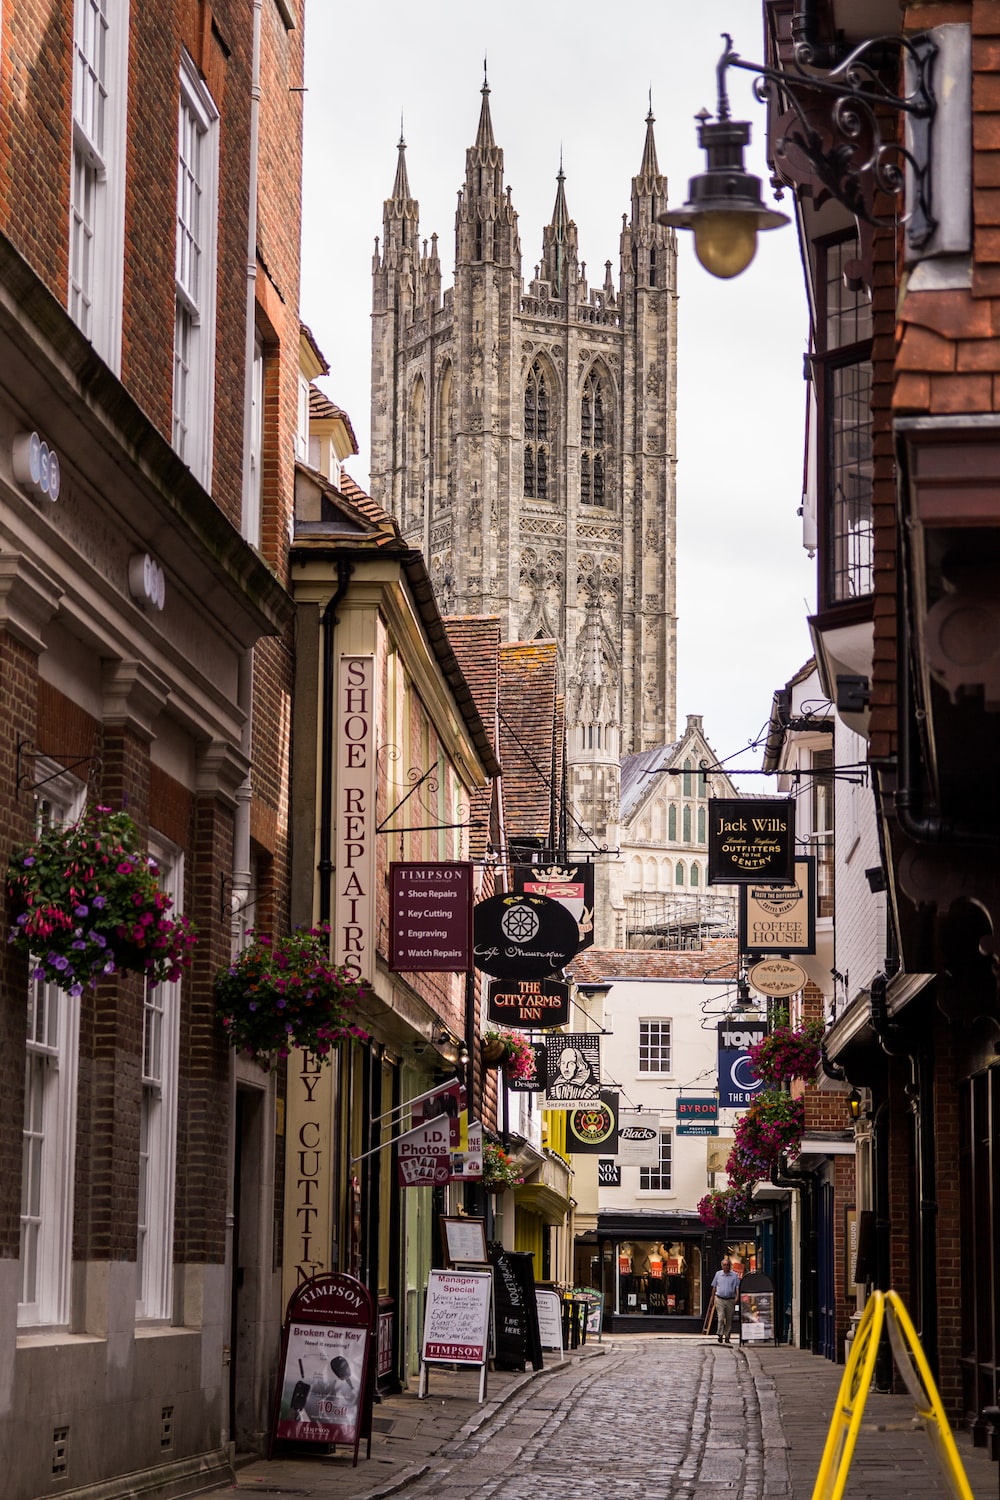 Canterbury Pictures Download Free Images on